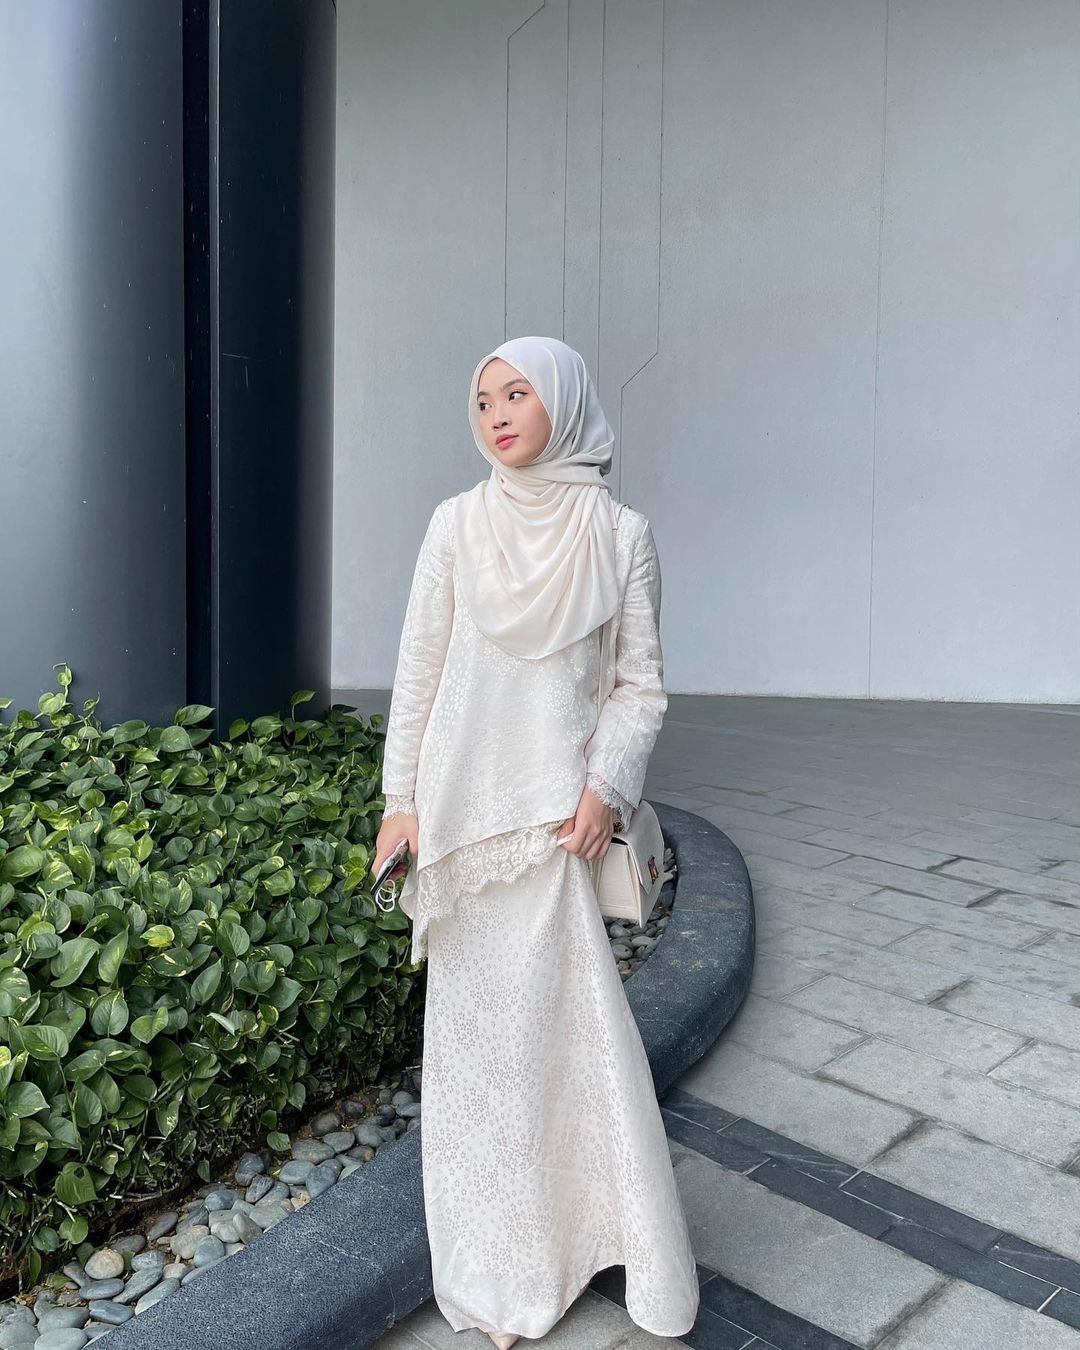 These Beautiful Raya Looks Can Be Your Next Wedding Guest Outfit Ideas